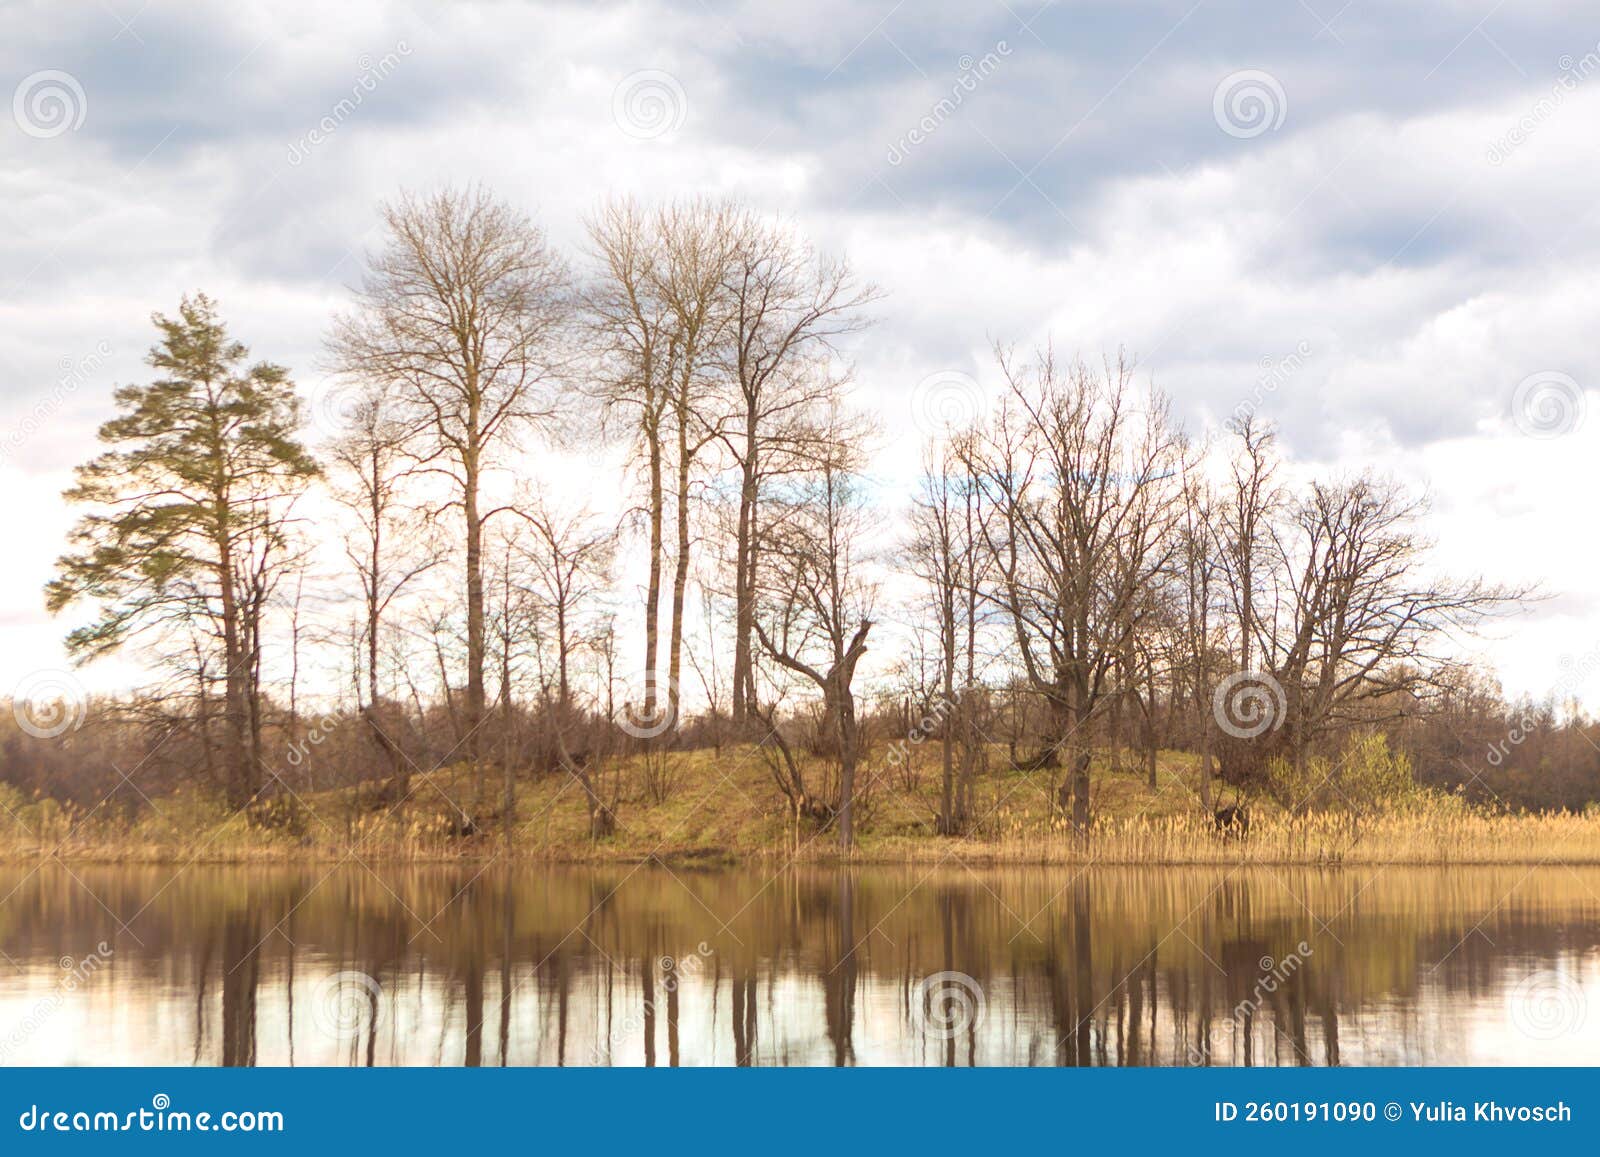 beautiful spring landscape with river and forest.